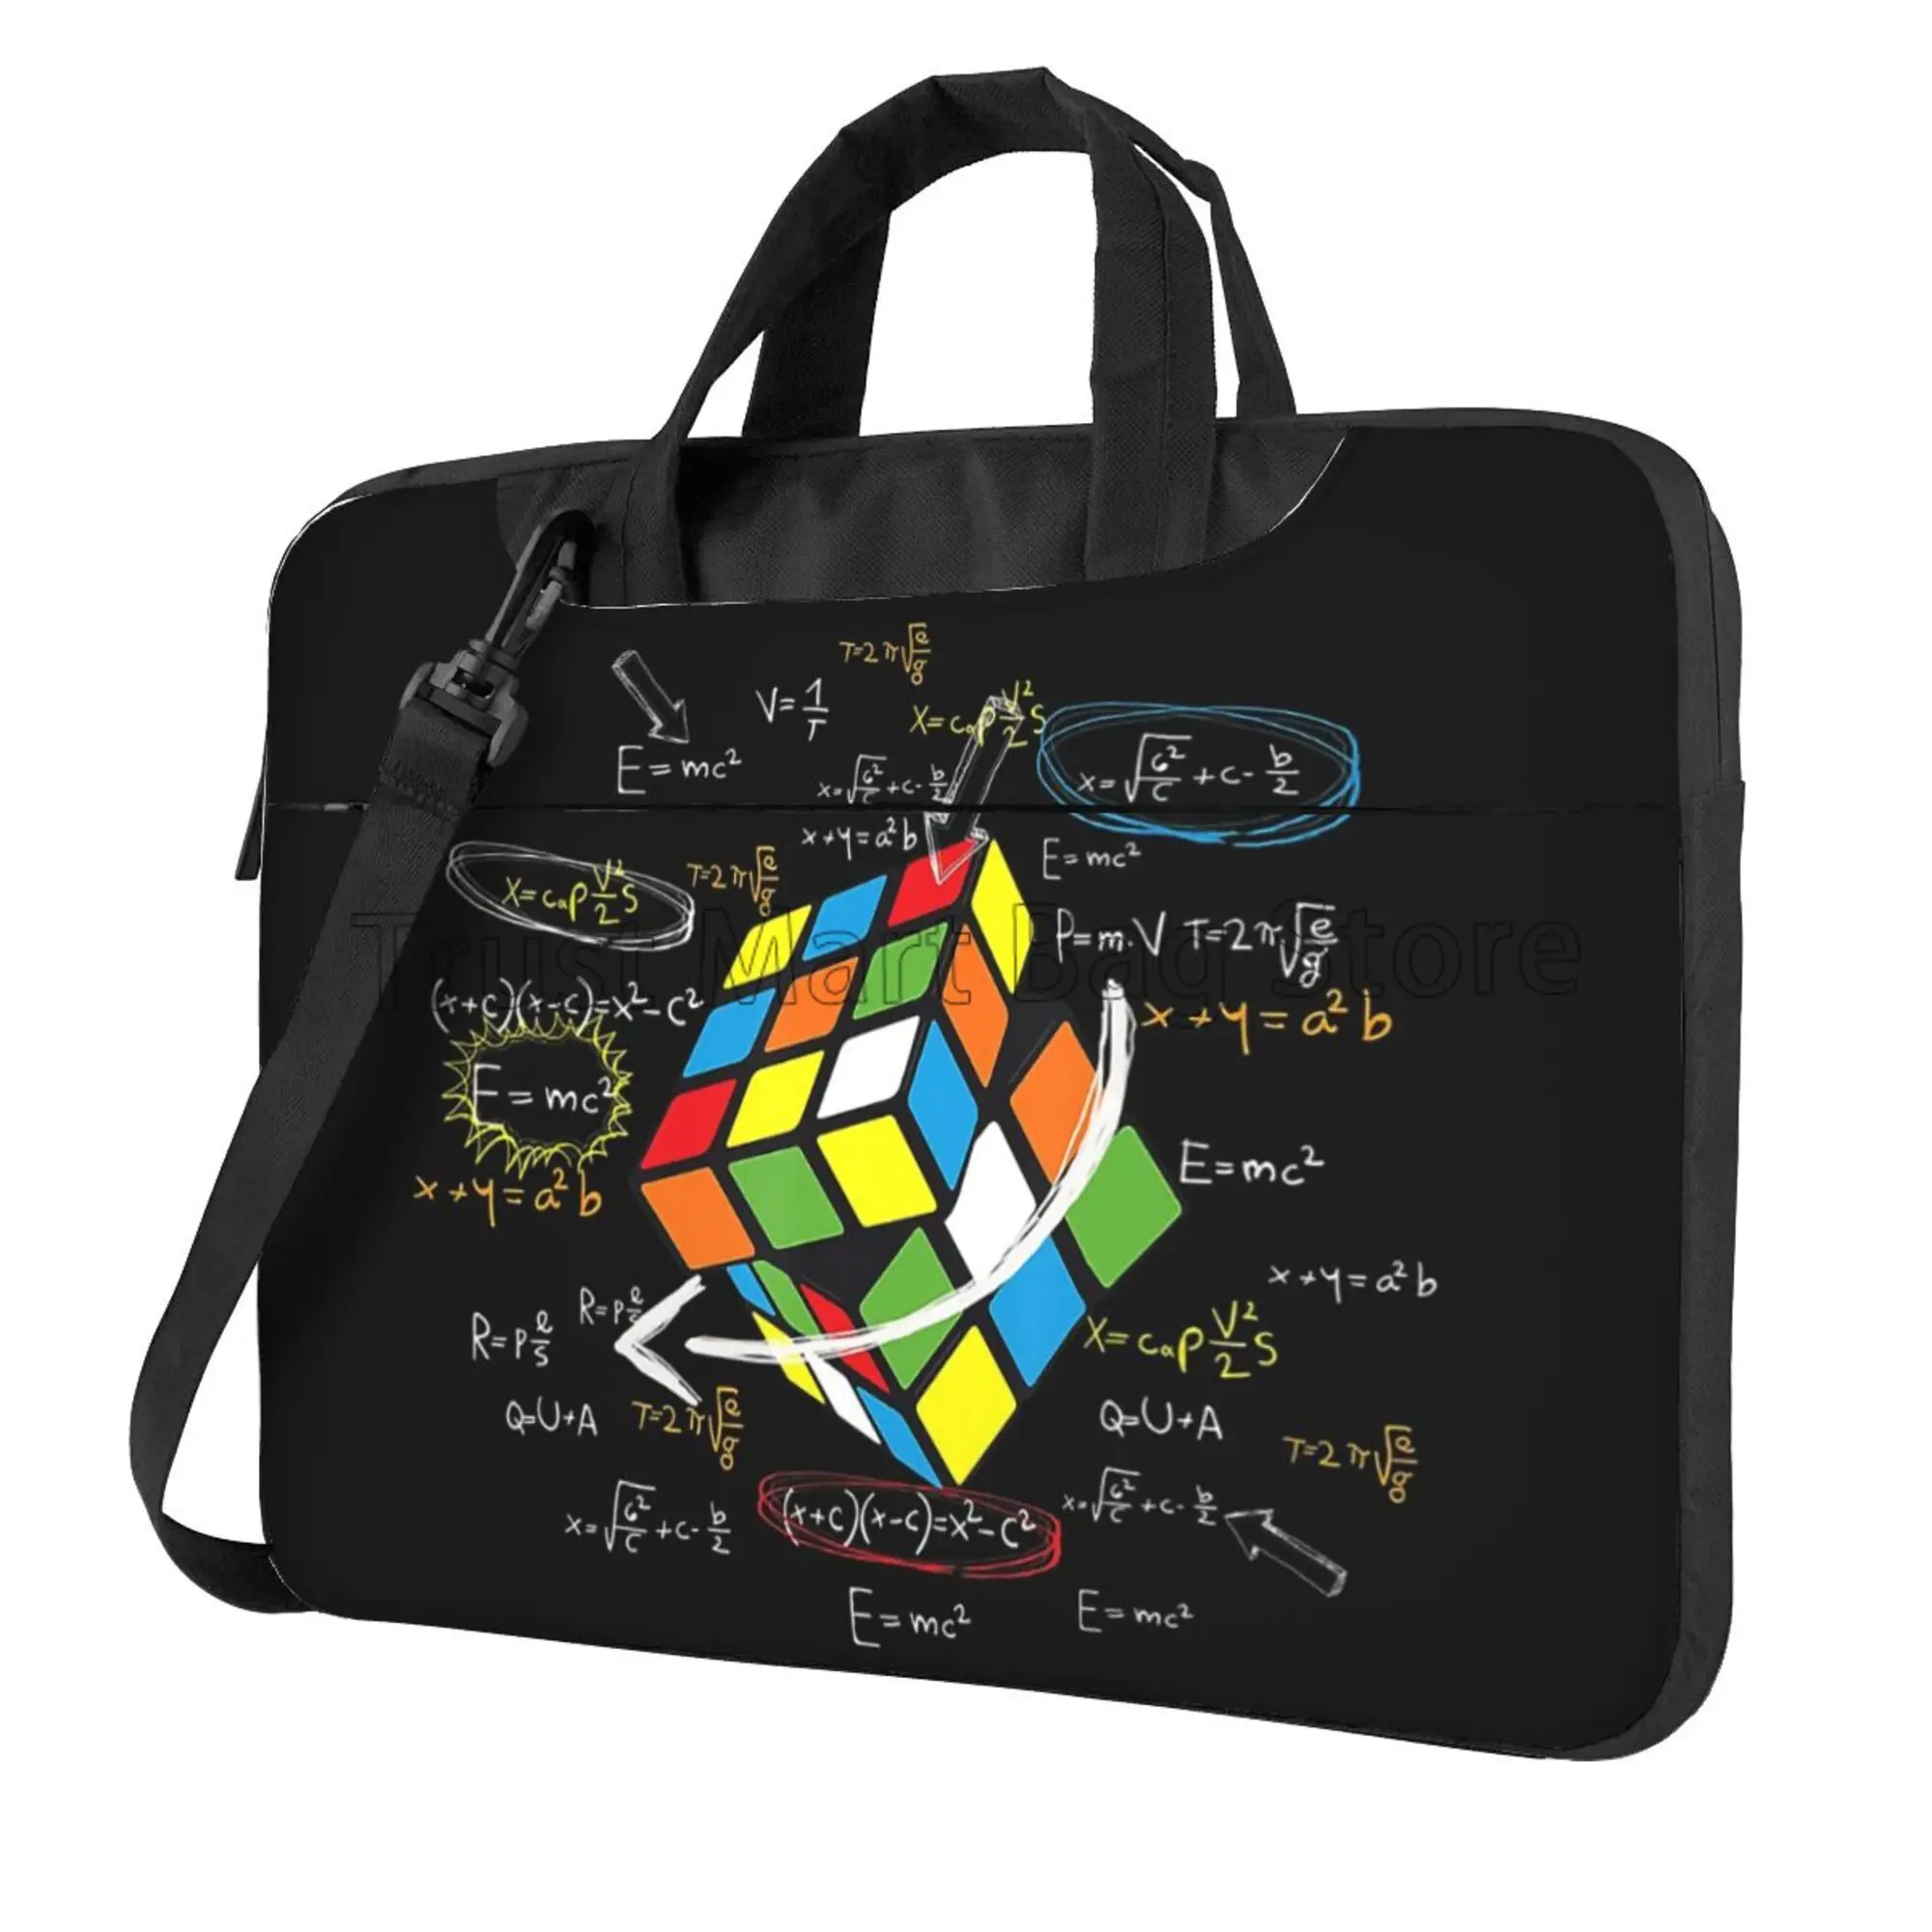 

Math Rubiks Rubix Cube Caps Laptop Case Bag Carrying Case Notebook Computer PC Cover Pouch with Handle Fits 13/14/15.6 Inch